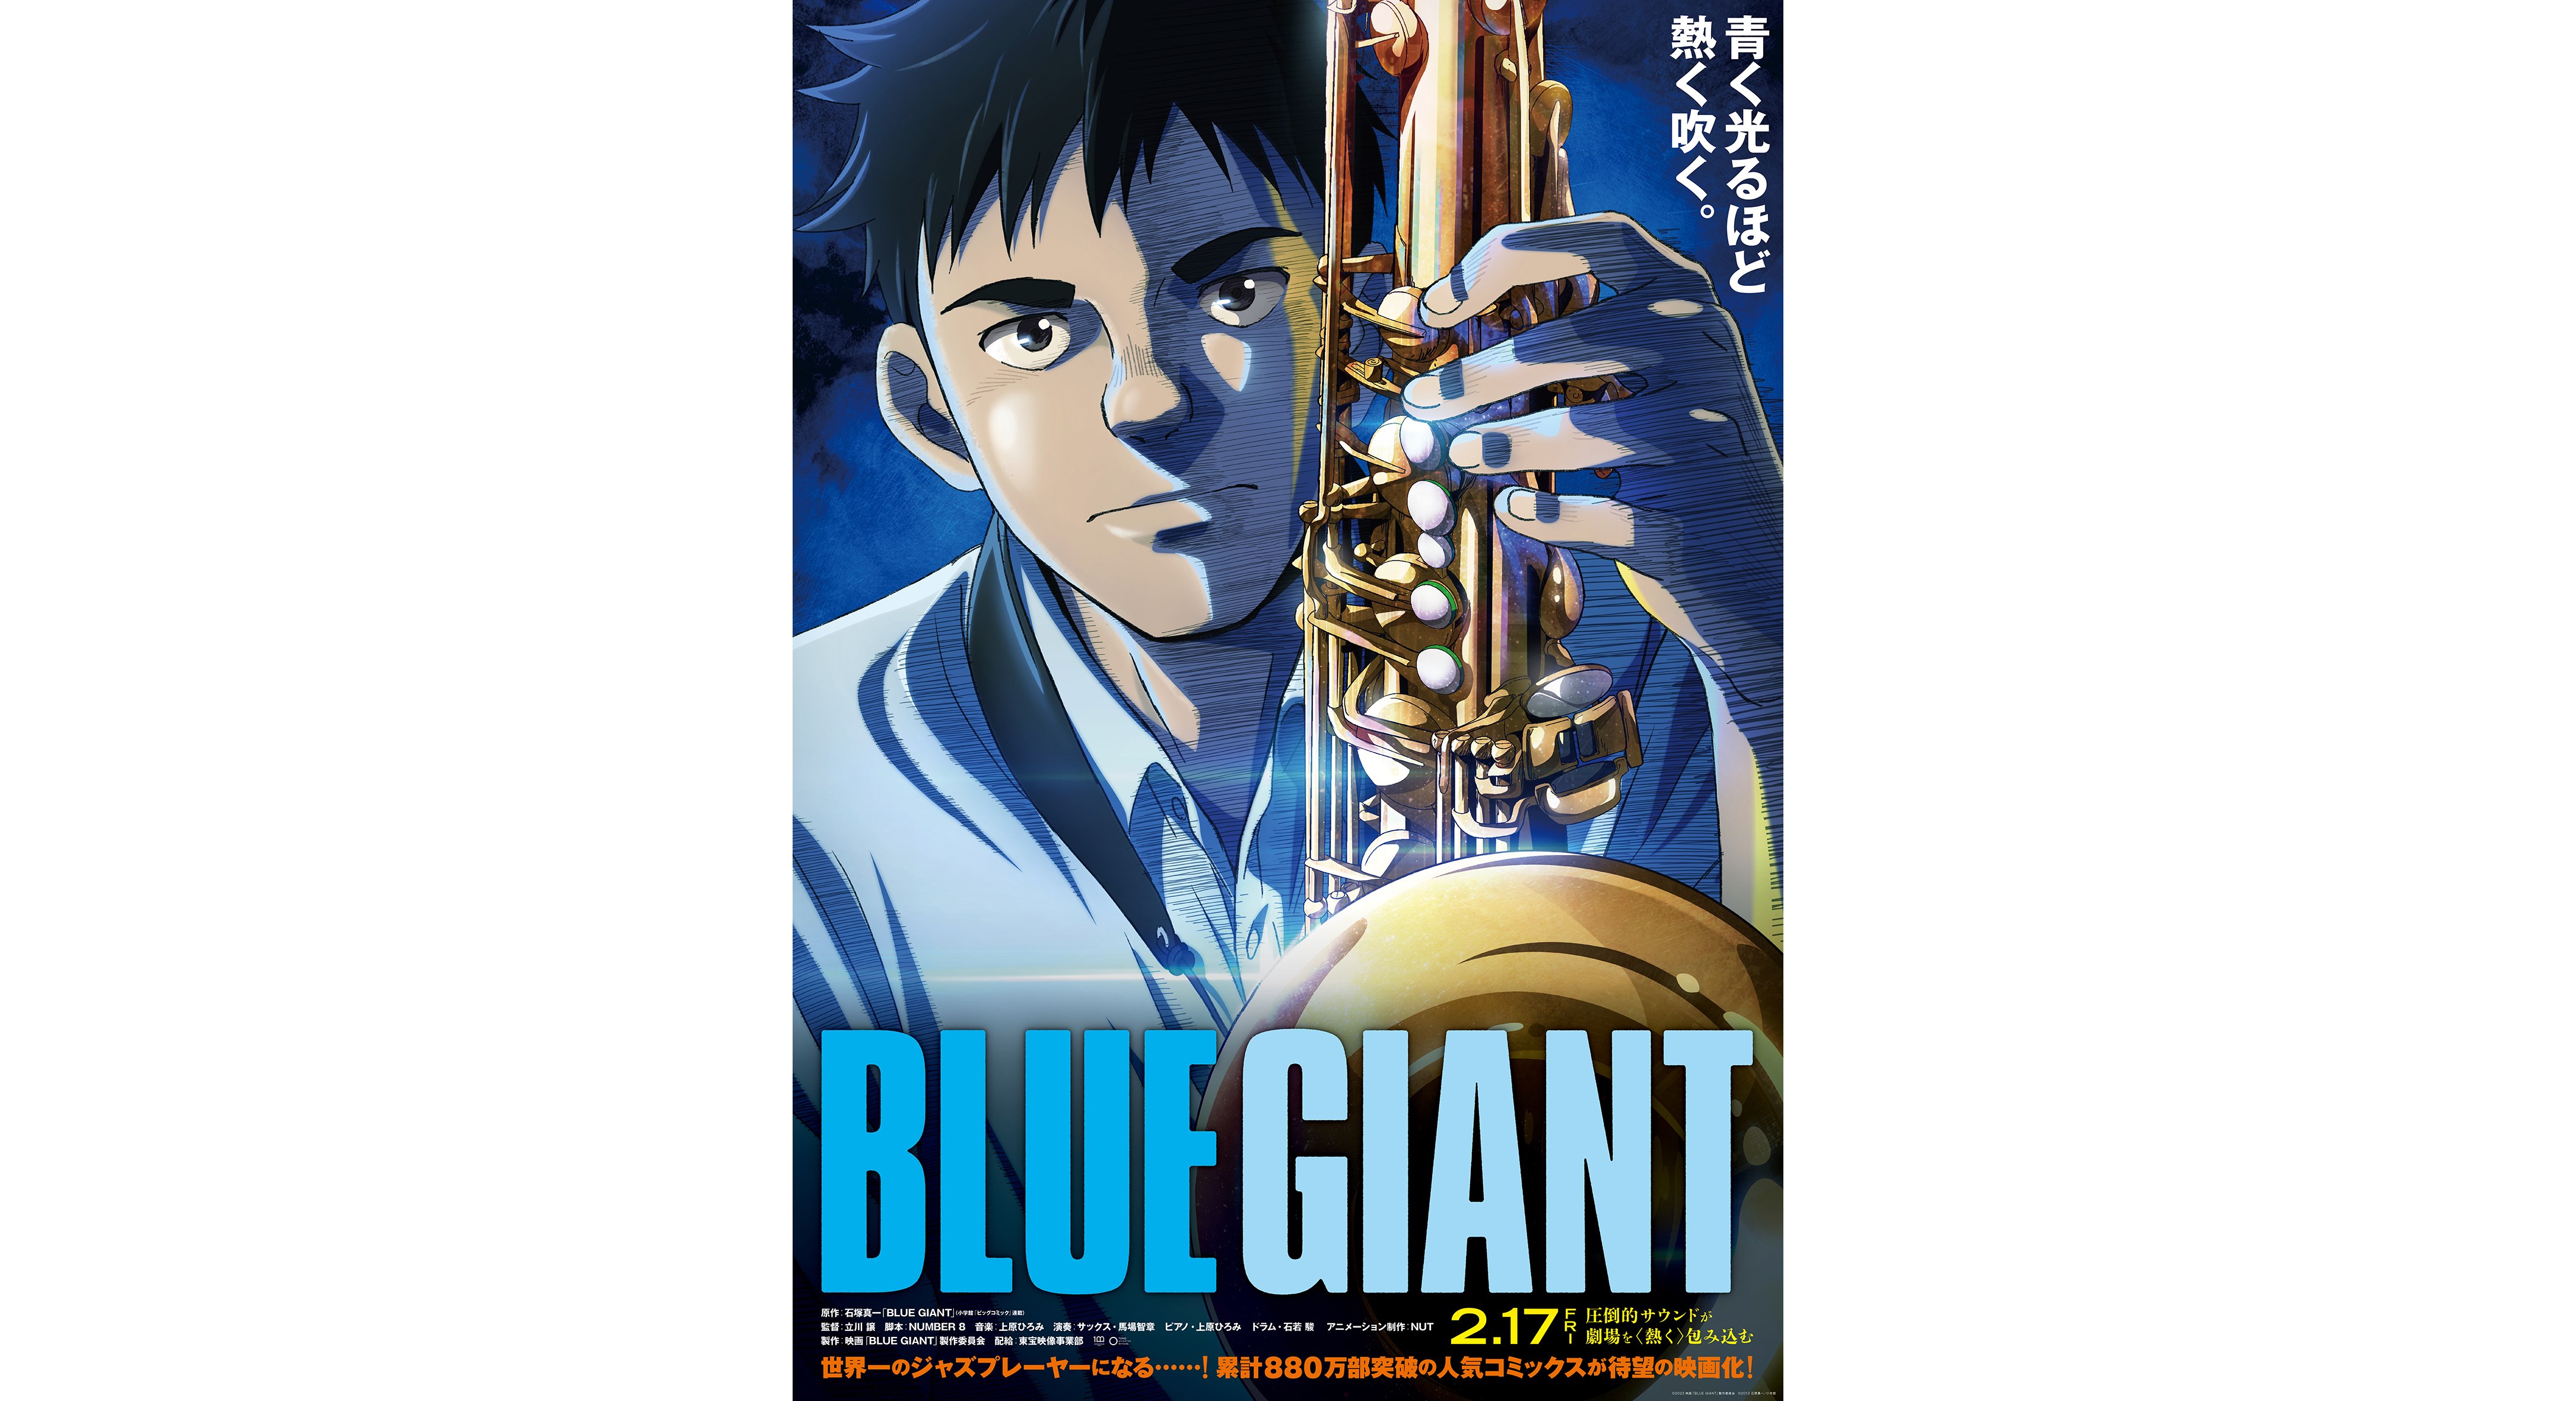 Jazz for Two Manga Reviews | Anime-Planet